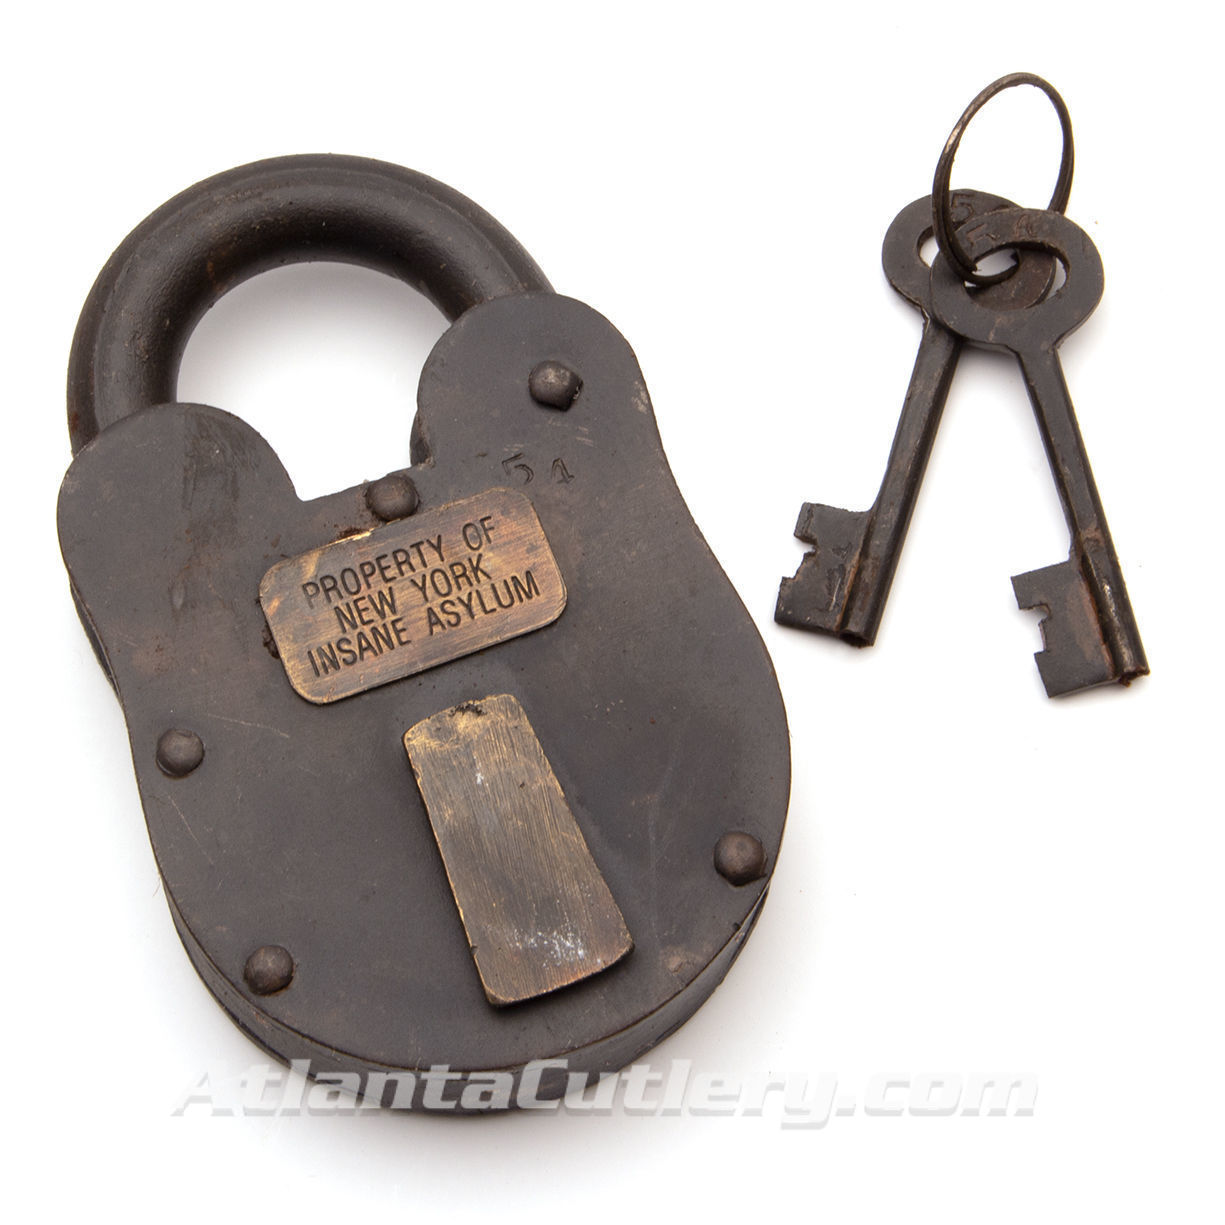 massive steel lock is fully functional with a badge “Property Of New York Insane Asylum” includes 2 keys similarly antiqued